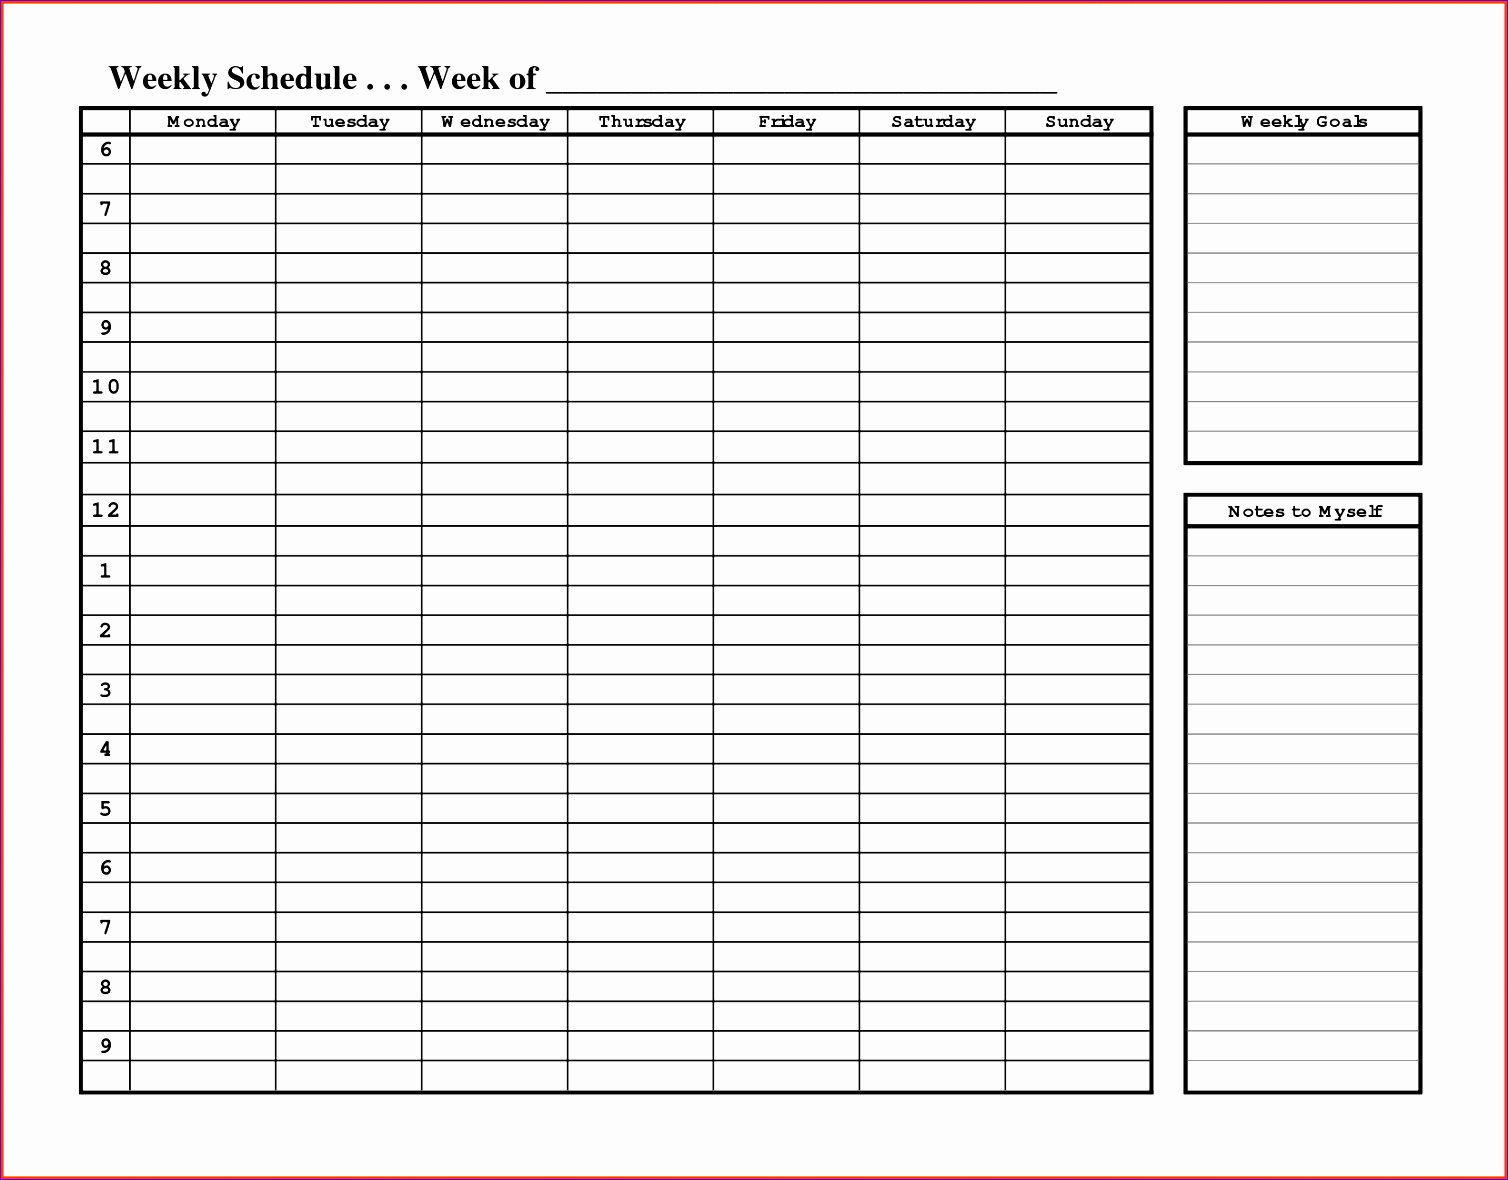 24 Hour Schedule Template Awesome 10 24 Hour Work Schedule Template Excel Exceltemplates